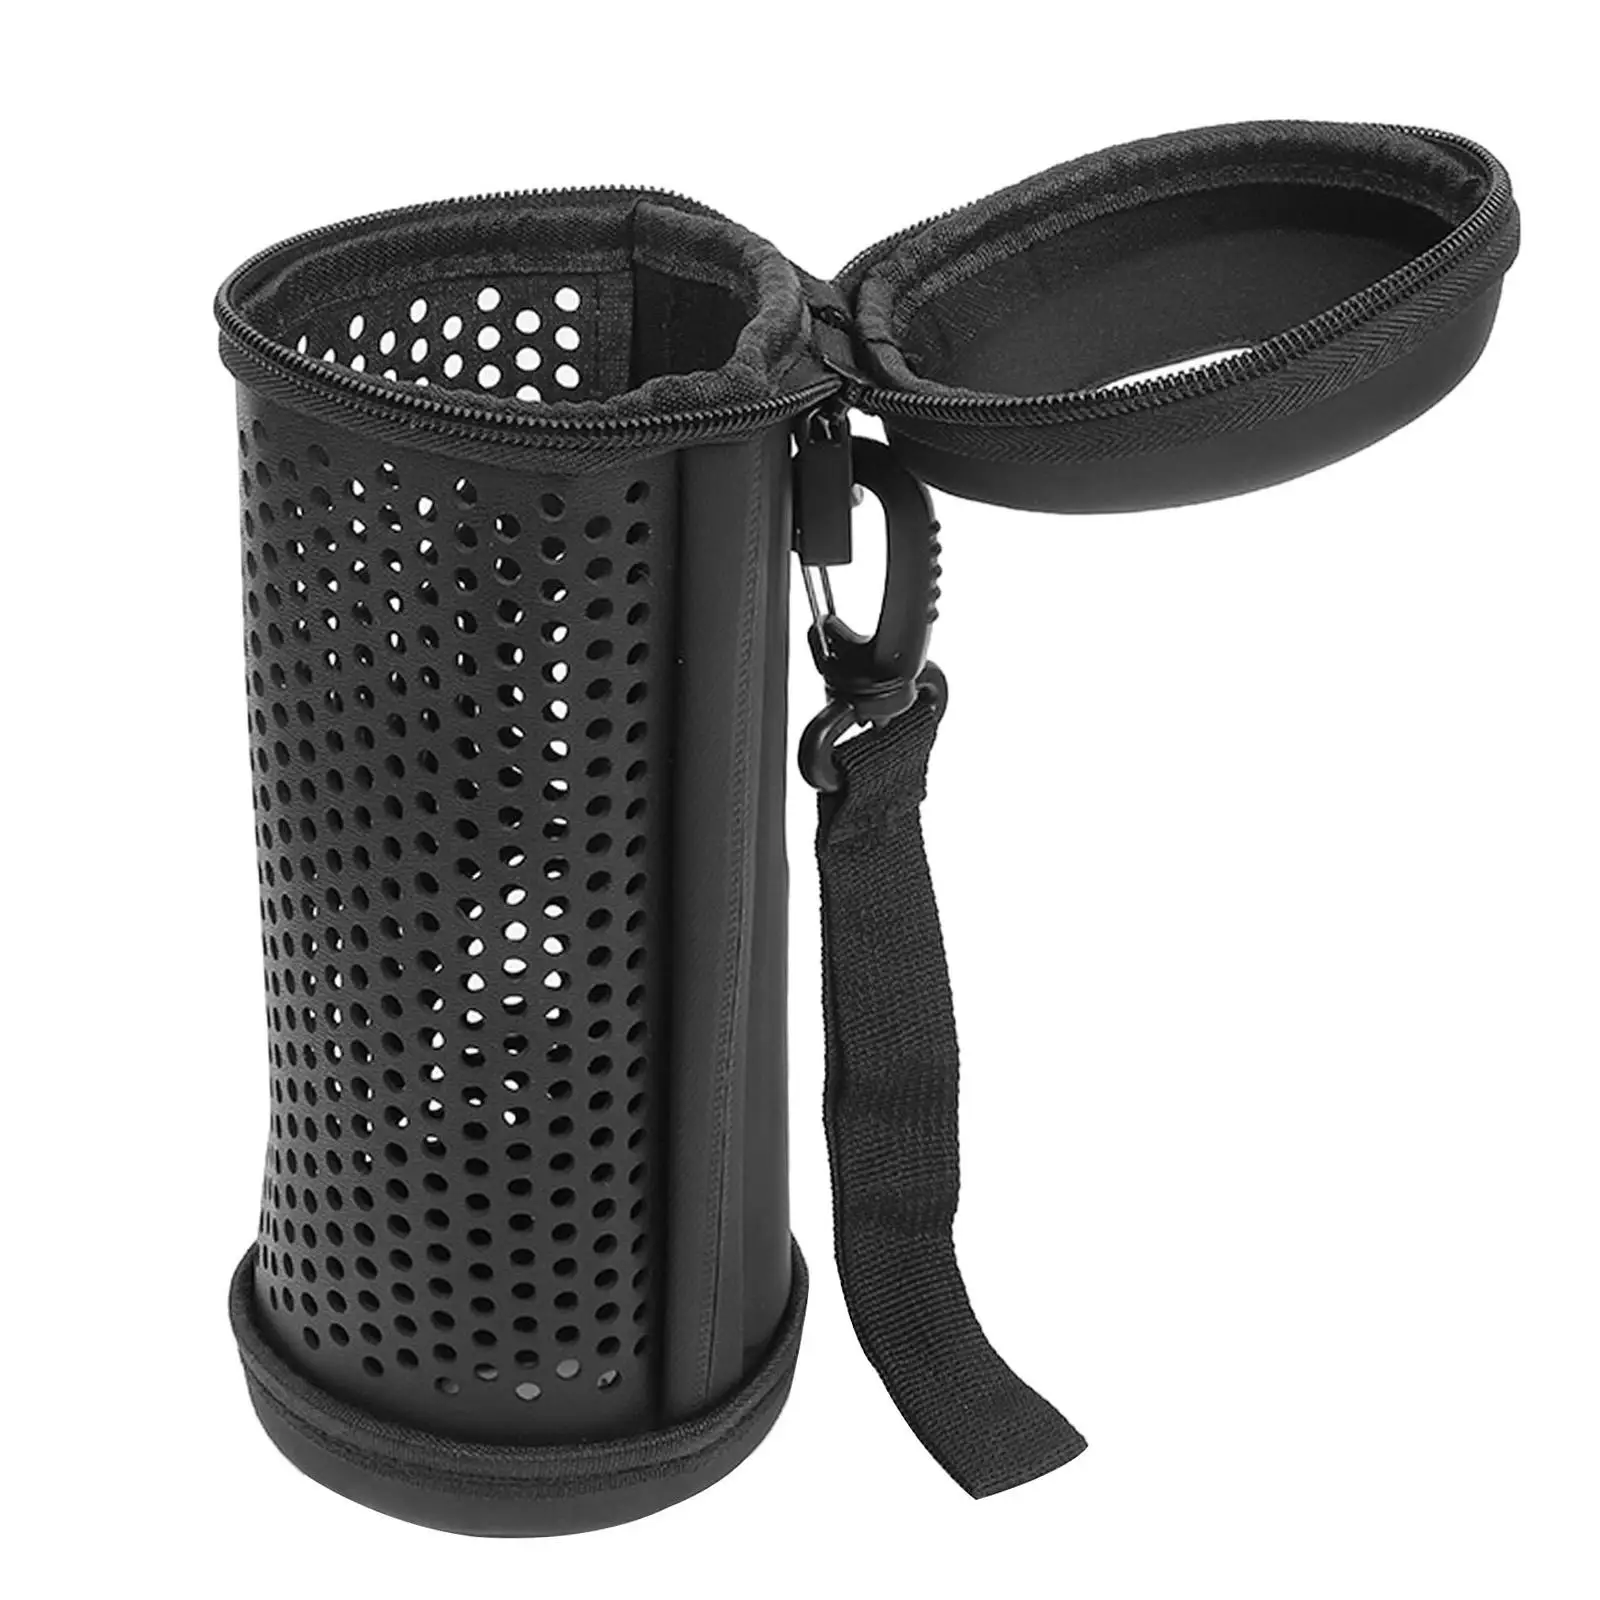 Hollowed Bluetooth Speaker Protective Case Cover Travel Carrying Portable Speaker Storage Bag Pouch Protector for UE Megaboom 3